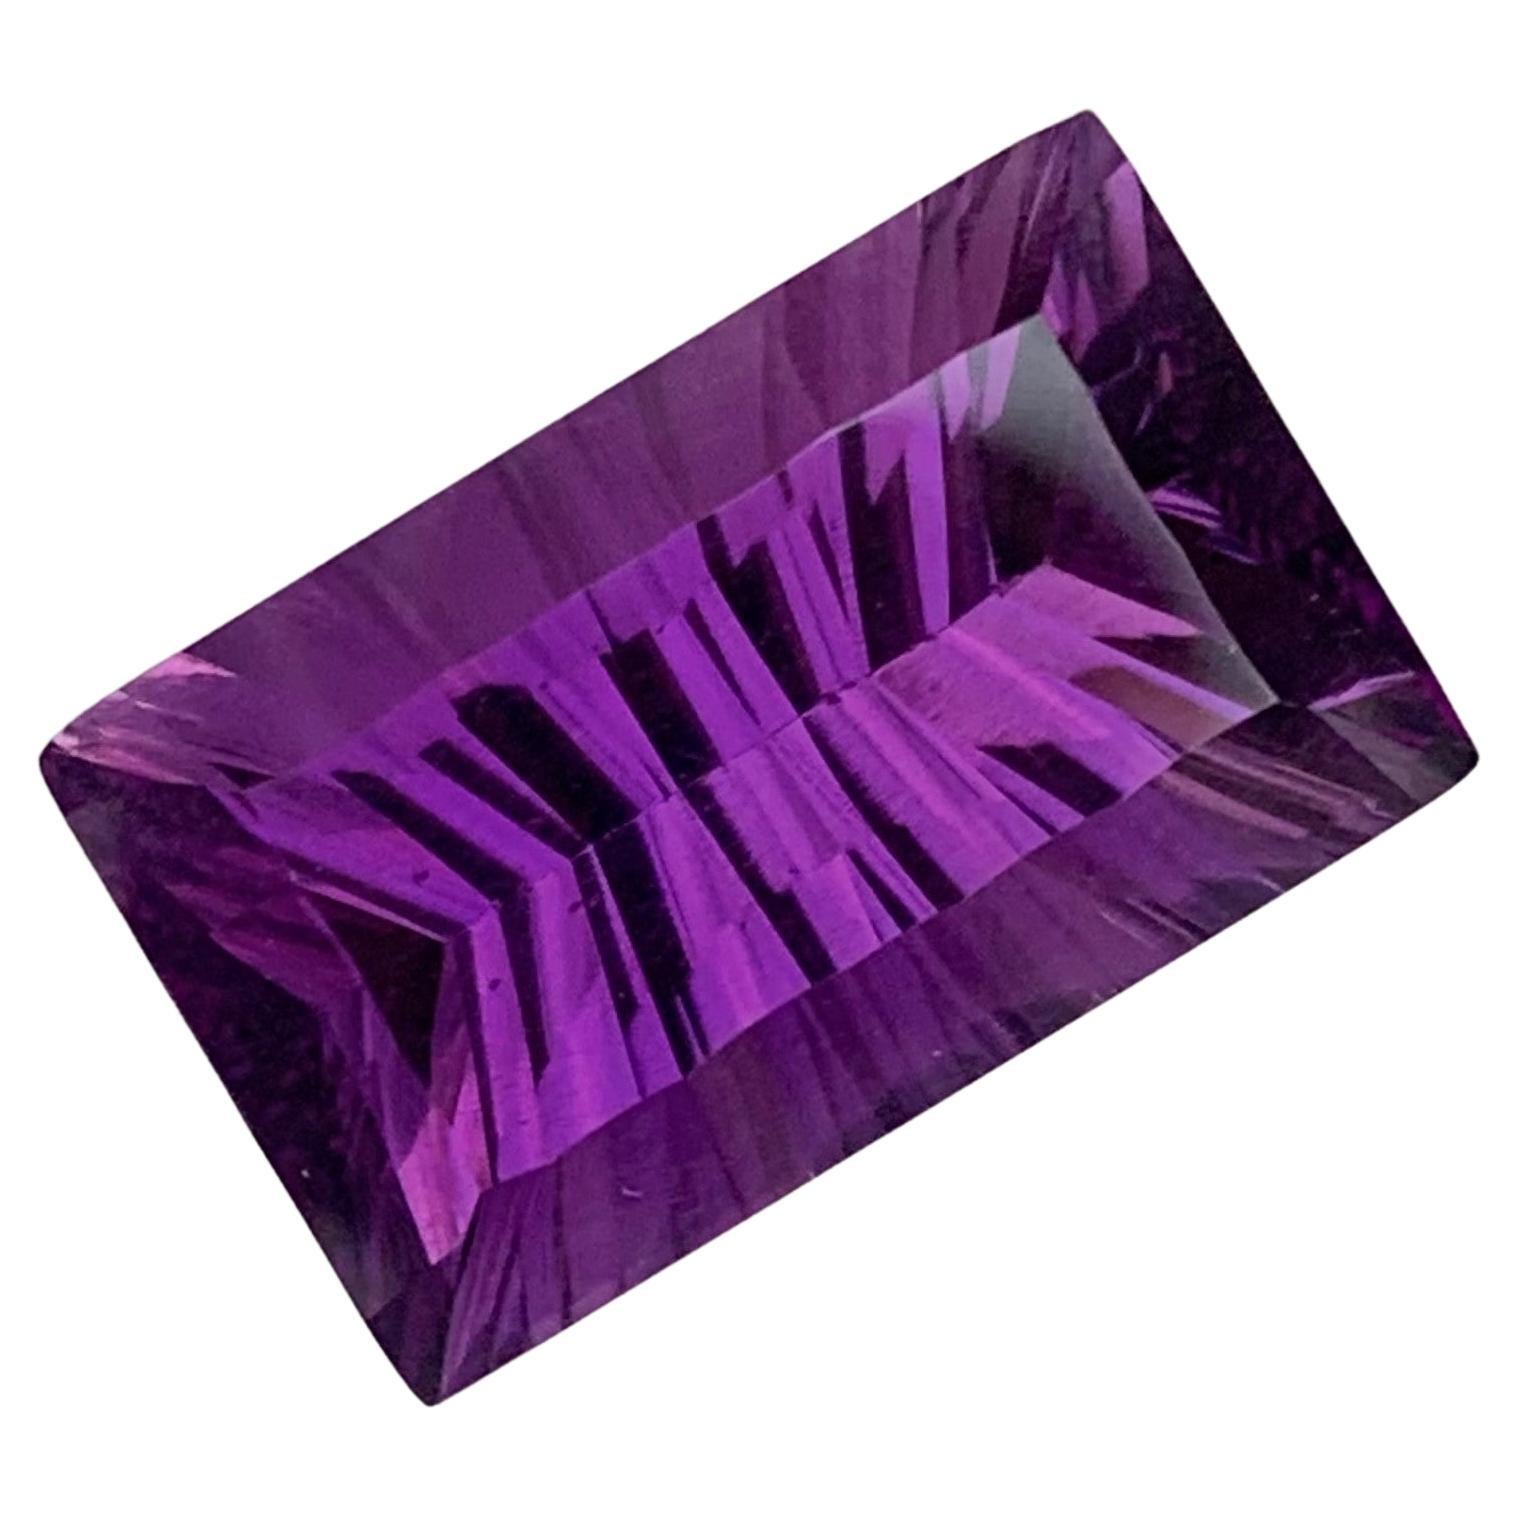 10.35 Carat Laser Cut Faceted Amethyst Gemstone Available For Sale 